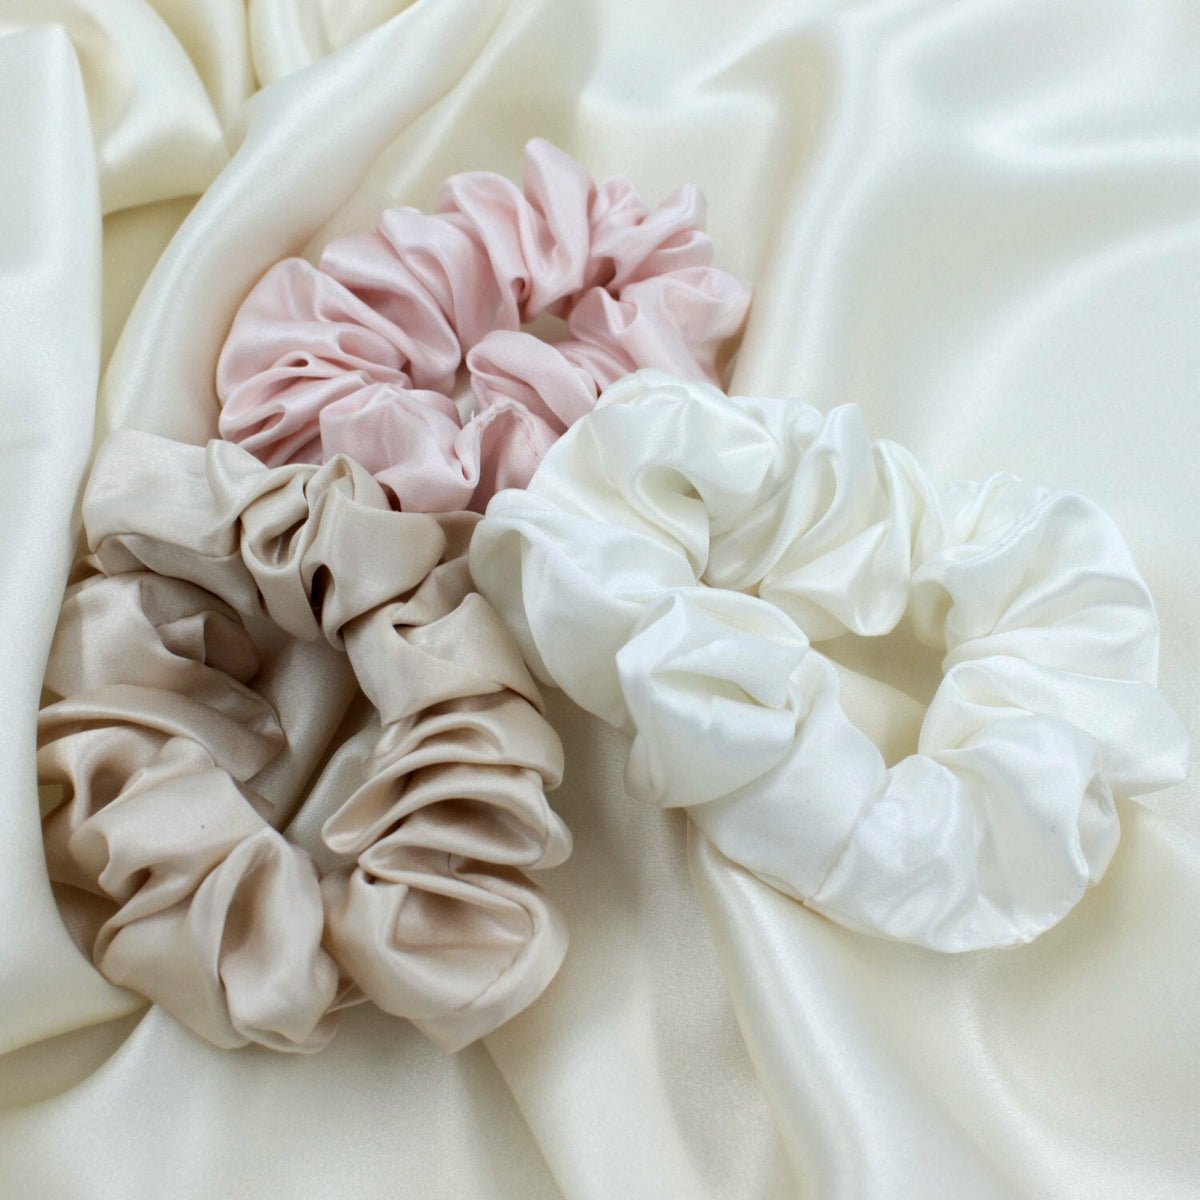 Large Ivory/Pink/Sand Scrunchies